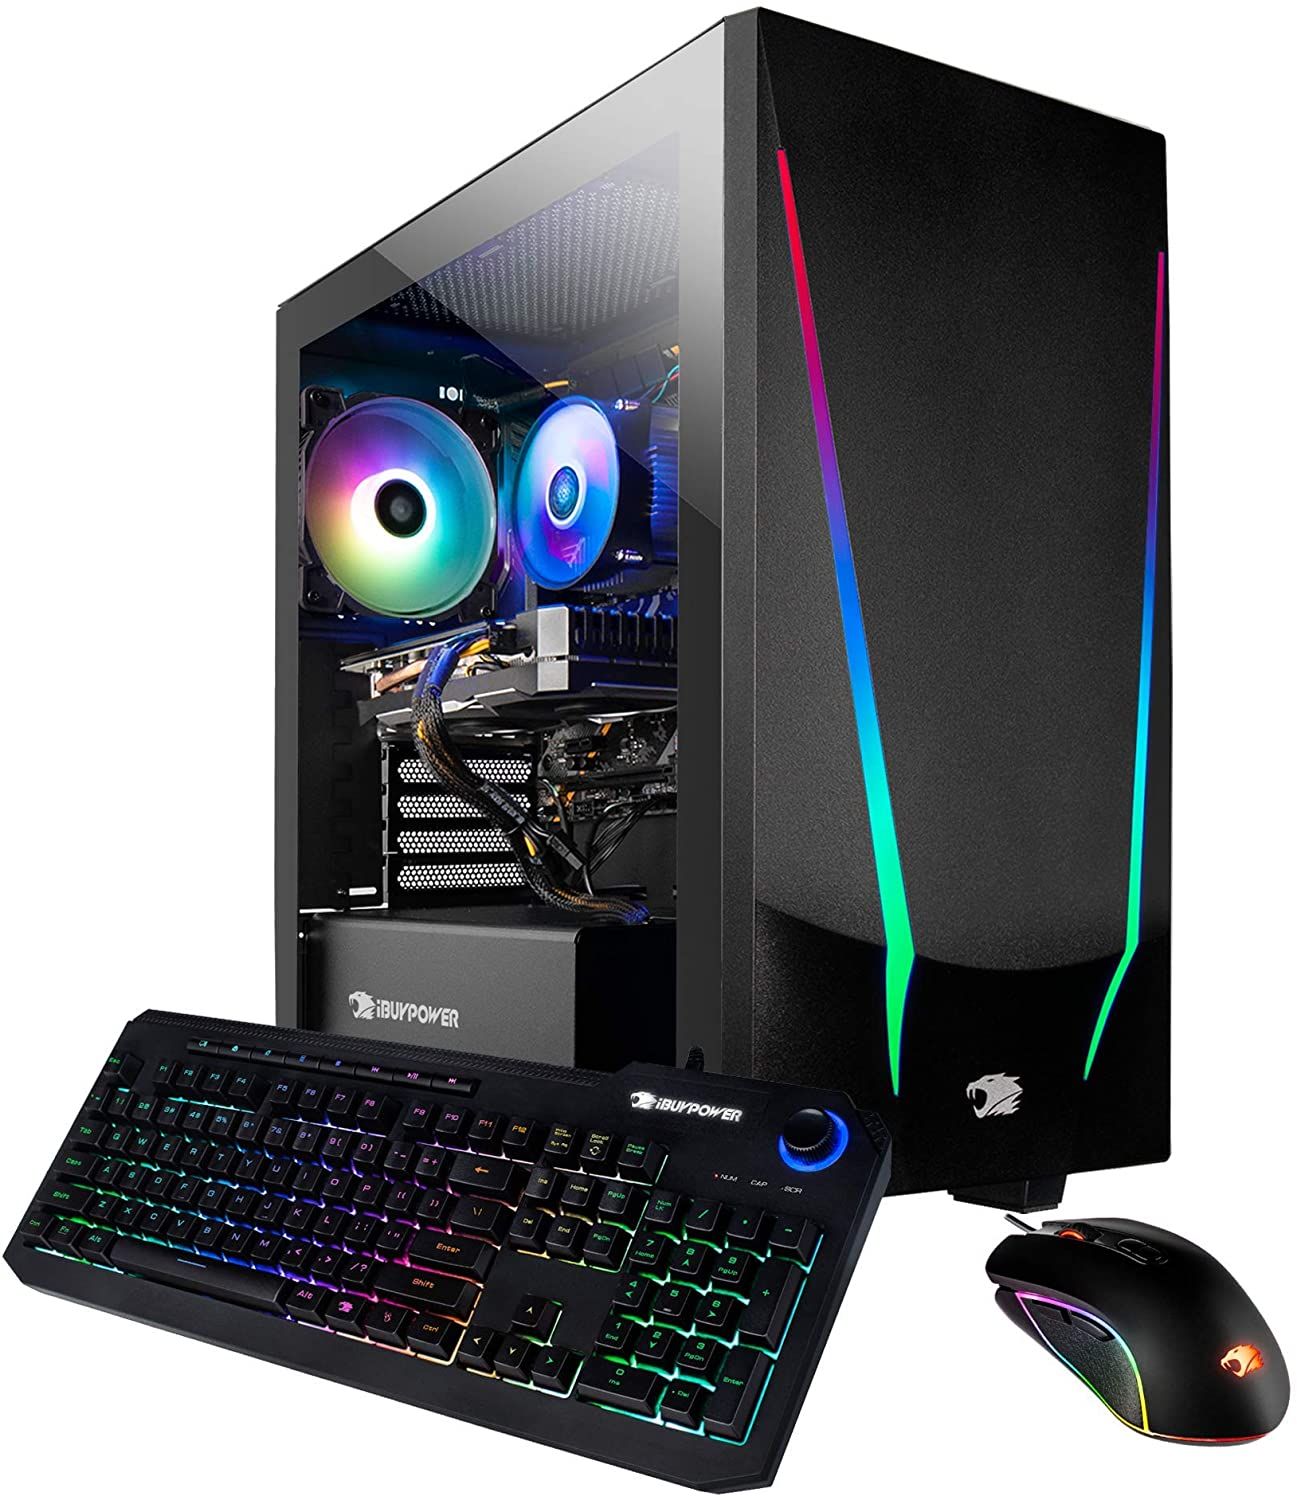 Cool Best Prebuilt Gaming Pc At Best Buy for Streamer